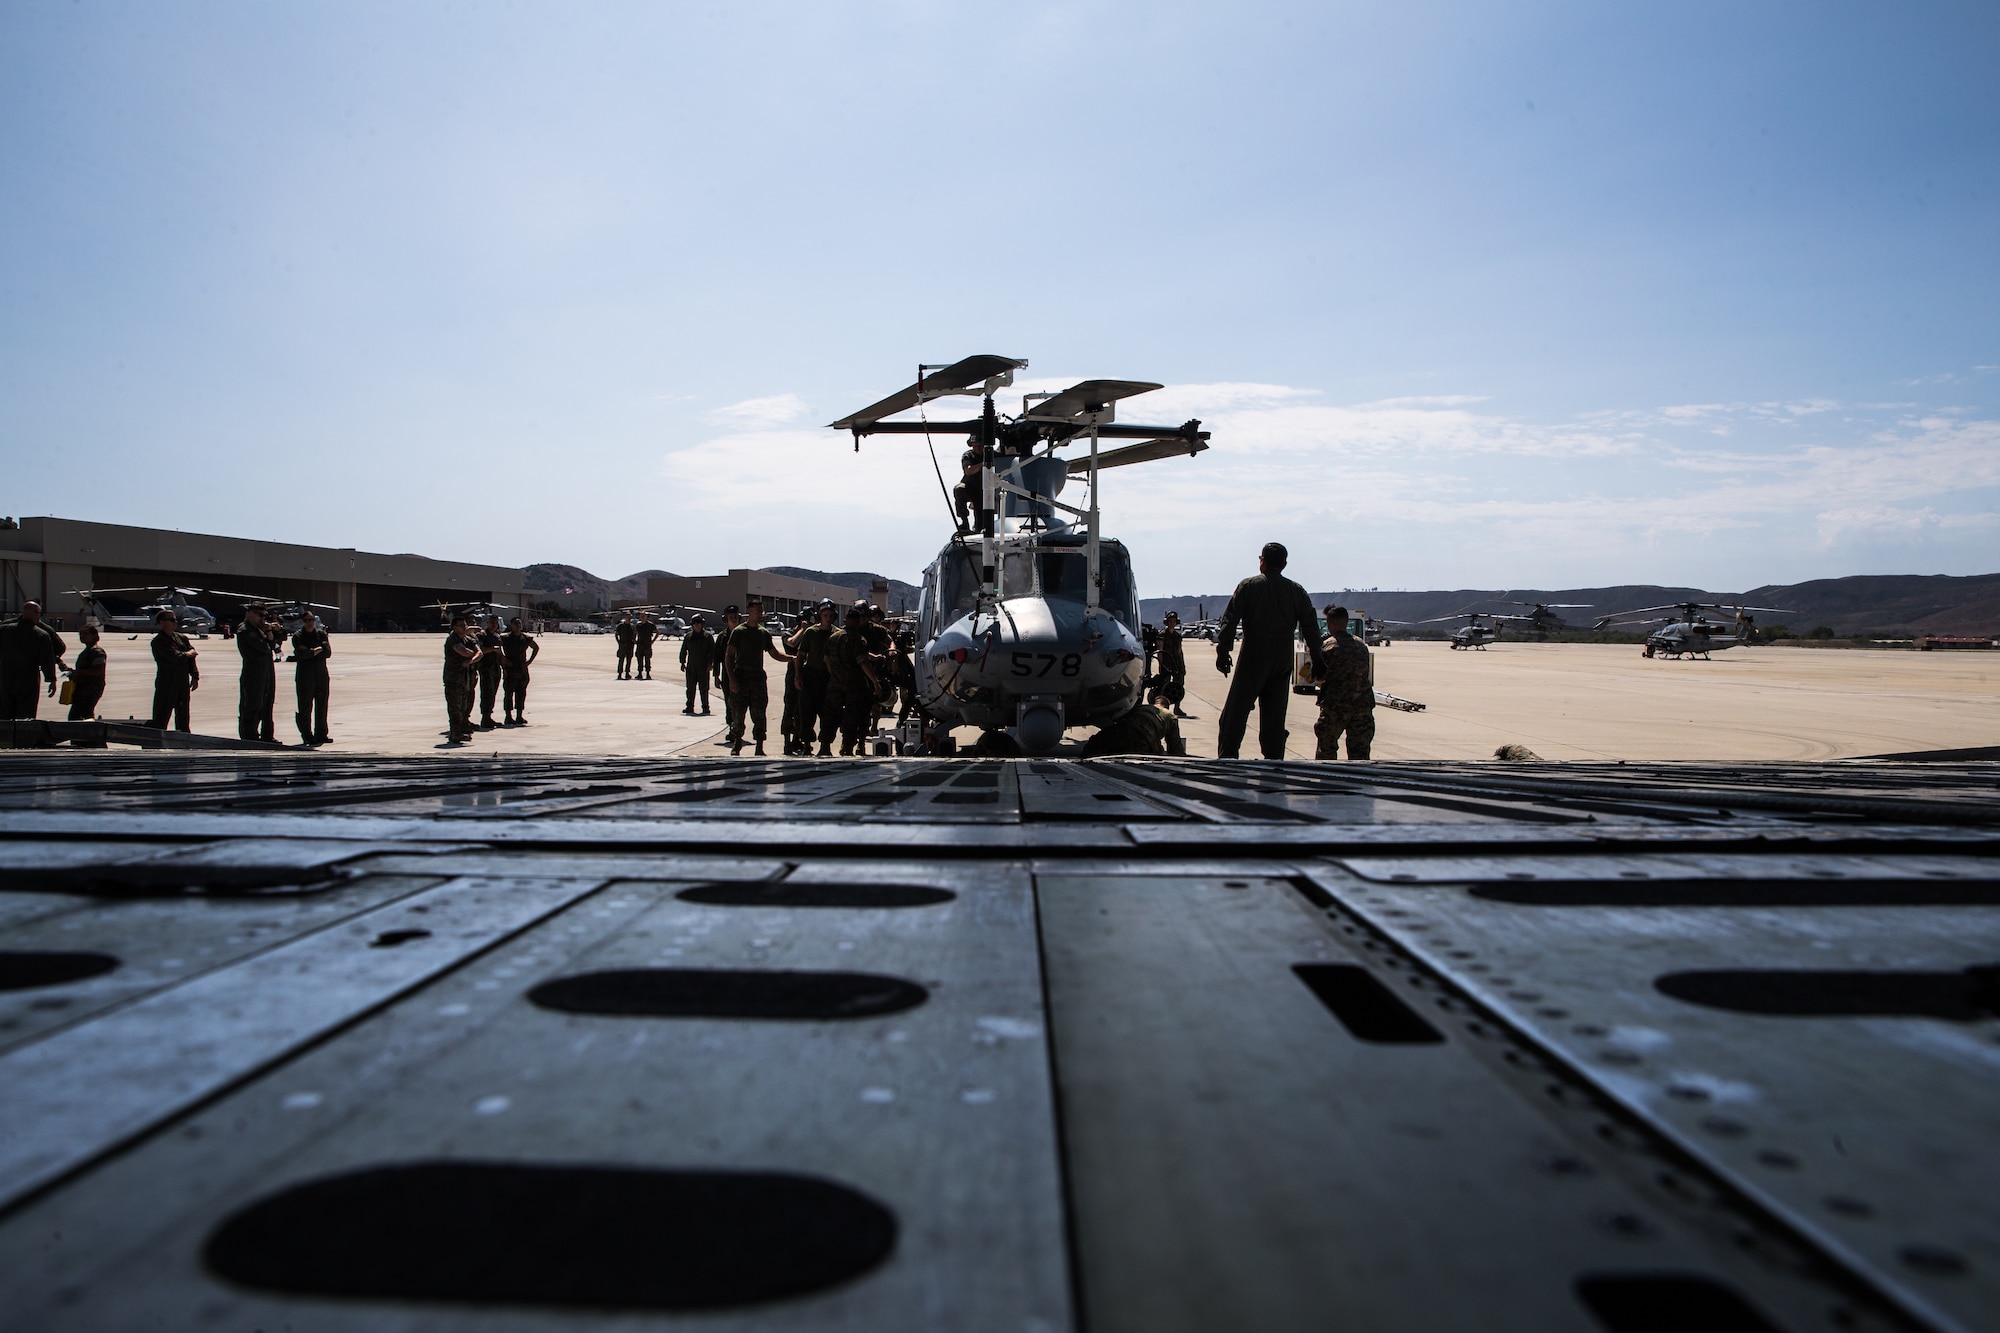 U.S. Marines and airmen assist in loading a UH-1Y Venom into C-5M Super Galaxy at Marine Corps Air Station Camp Pendleton, California, Sept. 16, 2019. The C-5M was a visiting U.S. Air Force aircraft from 433rd Airlift Wing, and was here as part of a dual service training exercise.The air station provides the 1st Marine Expeditionary Force and 3rd Marine Aircraft Wing with flexible deployment options.